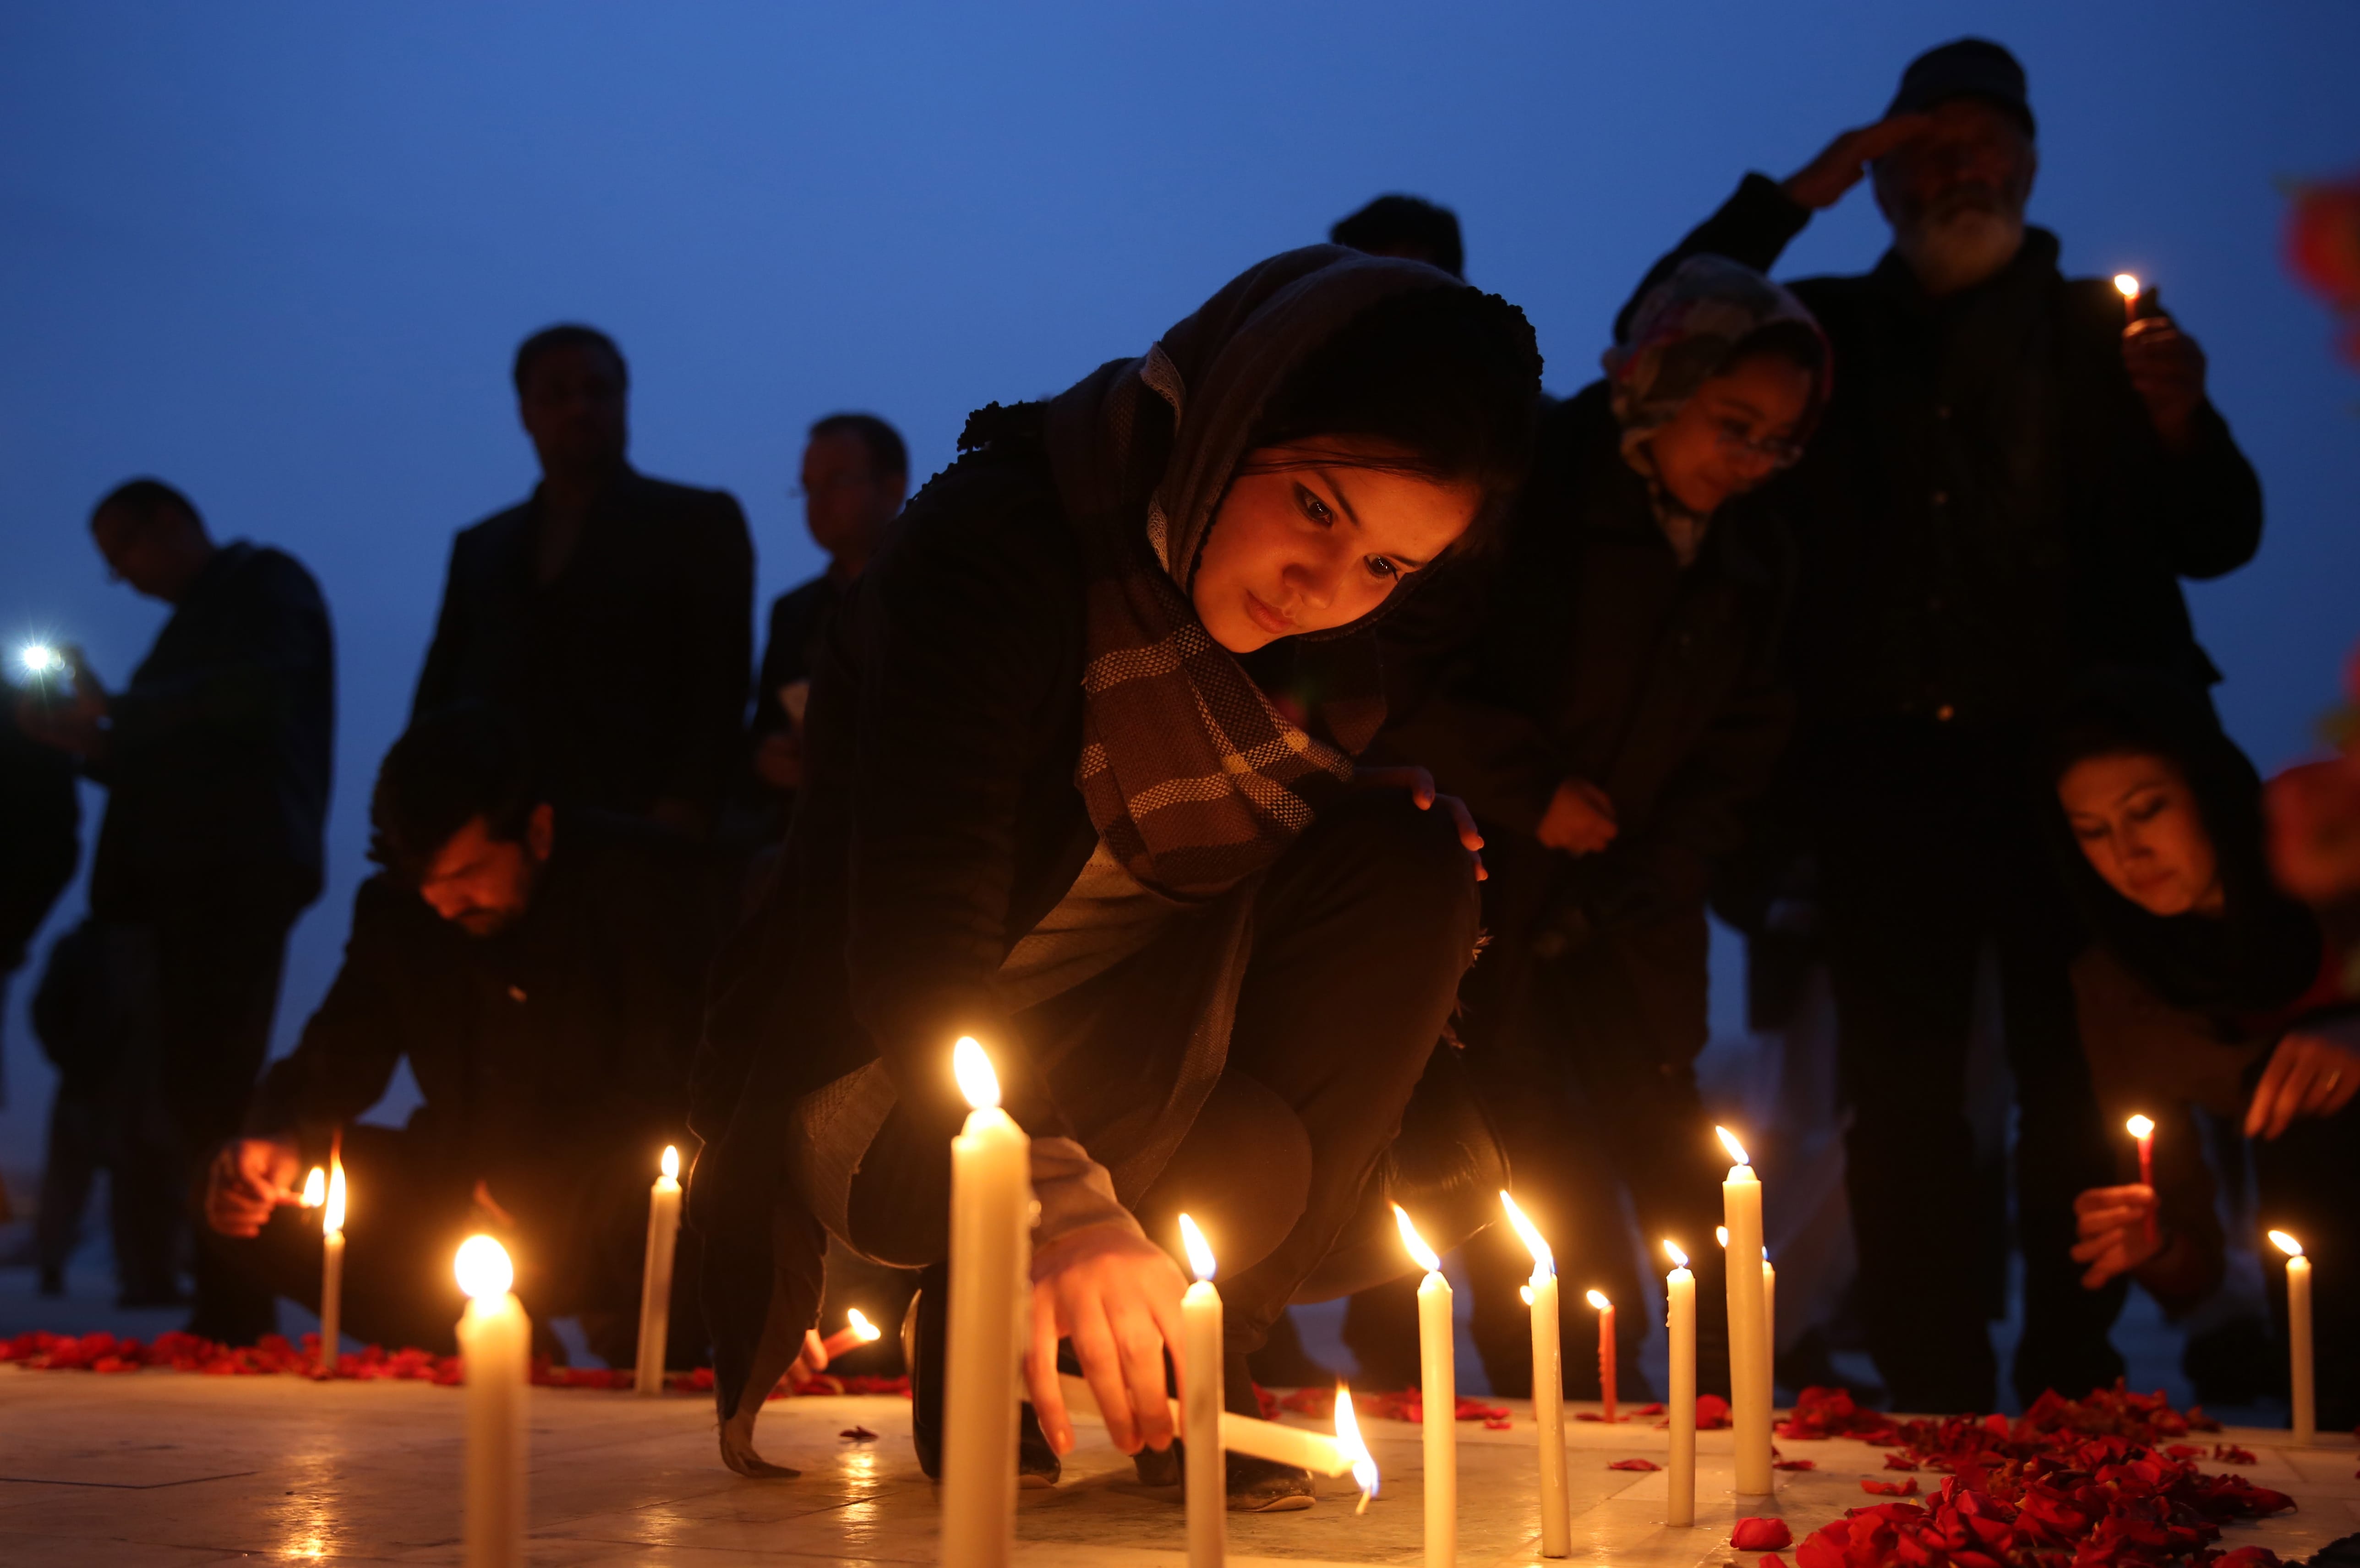 Afghan members of civil society organizations light candles during a memorial ceremony for 21 Afghan National Army  soldiers in Kabul, Afghanistan, on Tuesday.